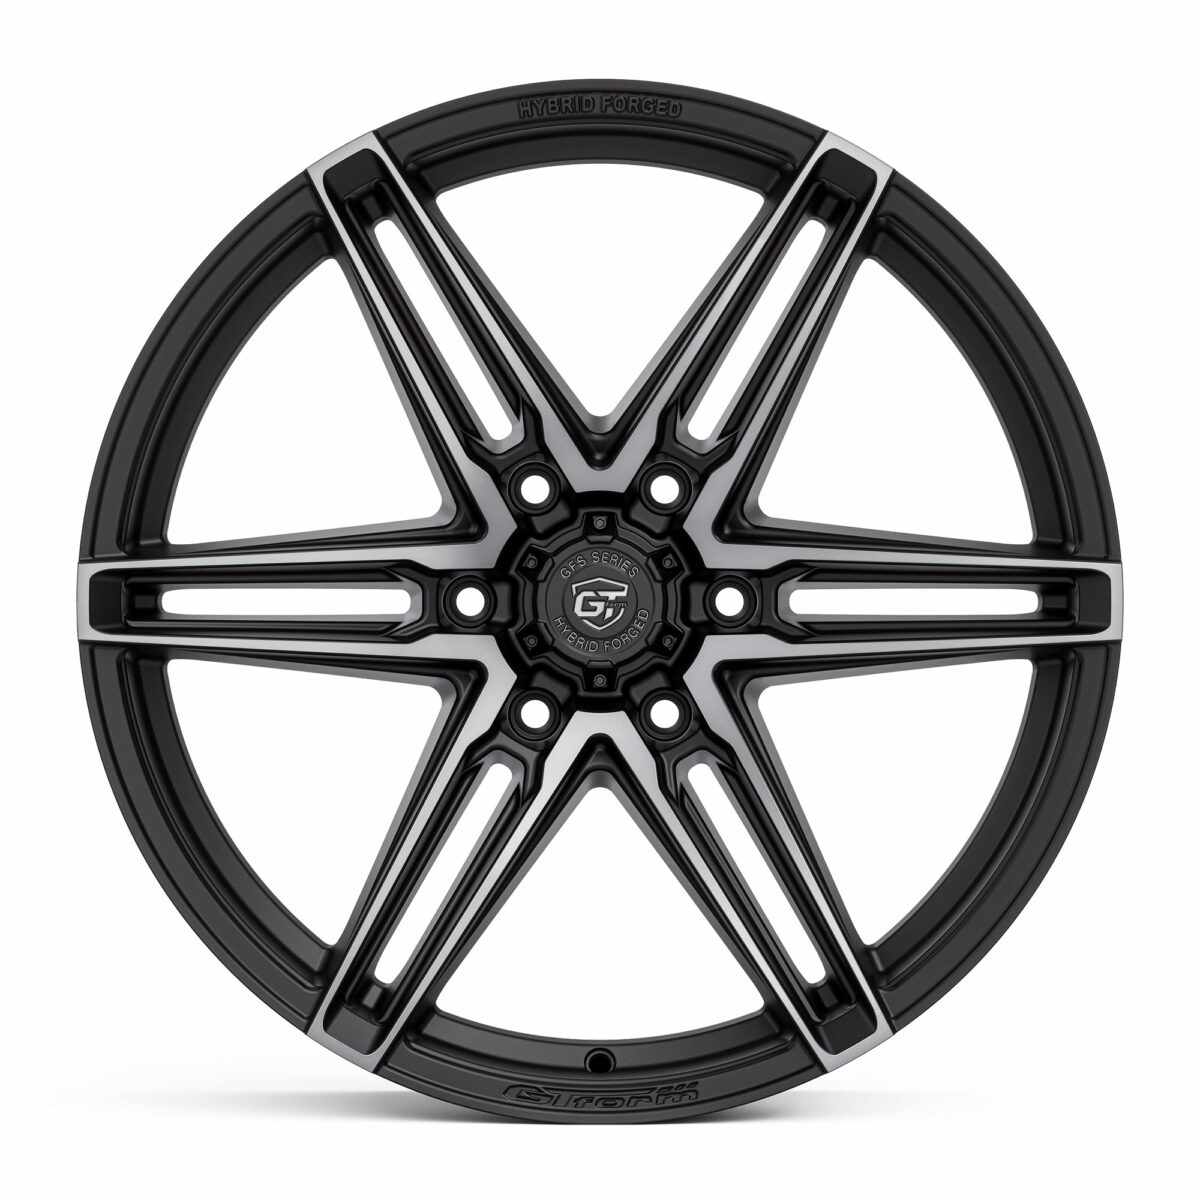 4X4 WHEELS GT FORM GFS2 HYBRID FORGED MATTE BLACK GREY TINT 20 INCH OFFROAD RIMS FOR 4WD SUV